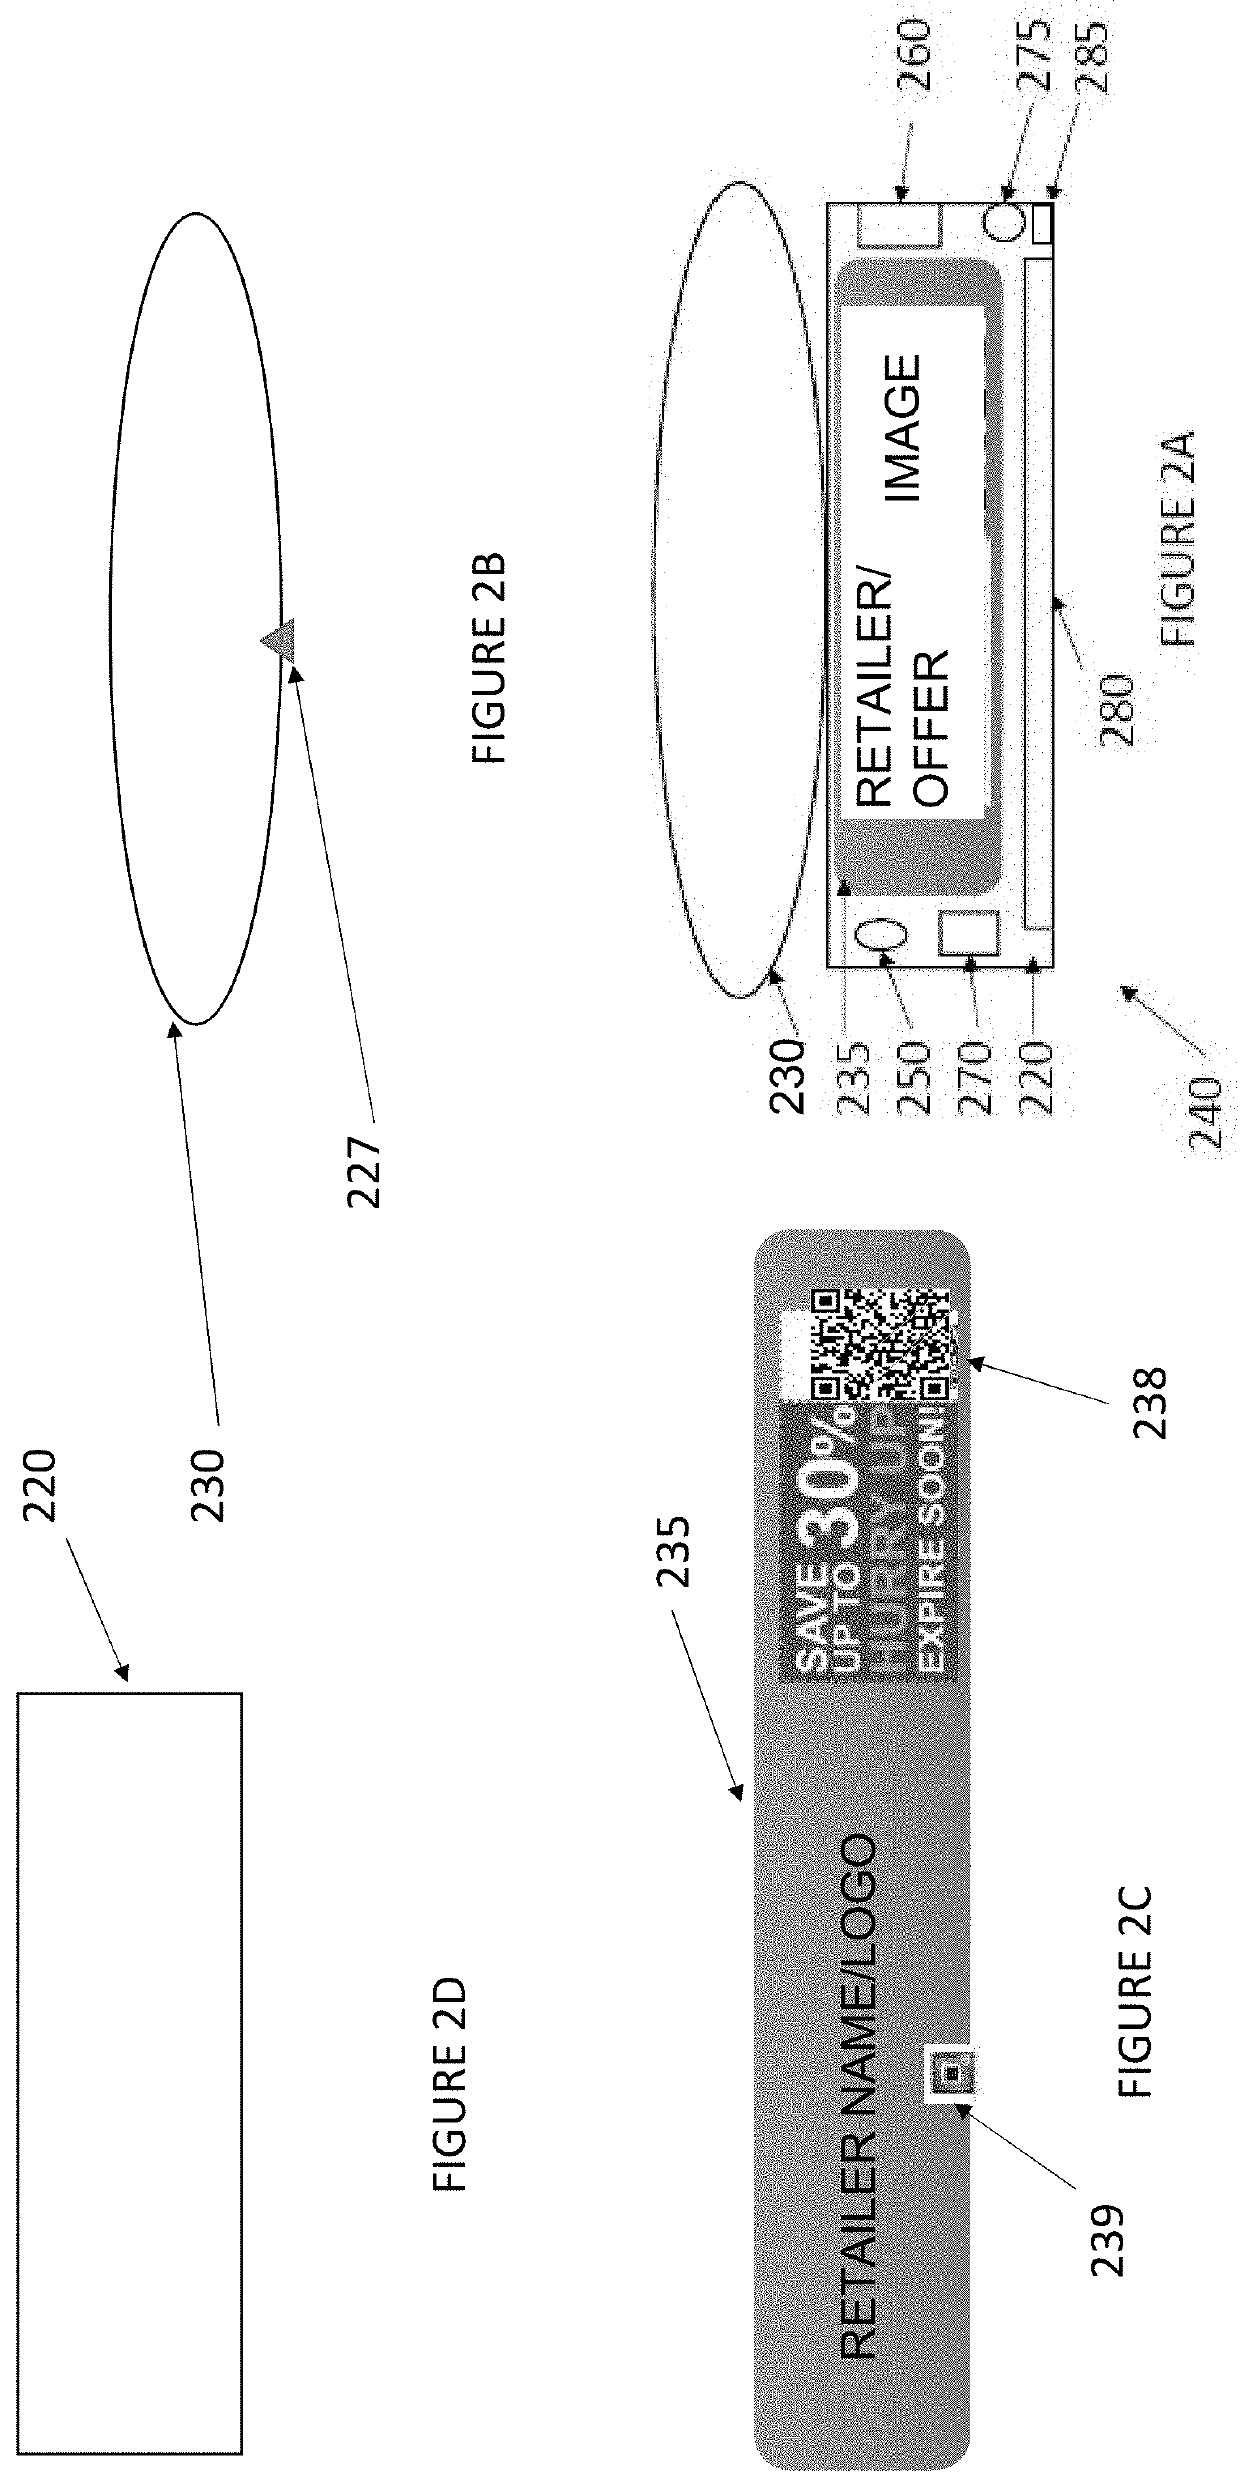 System and method for ground-based advertising